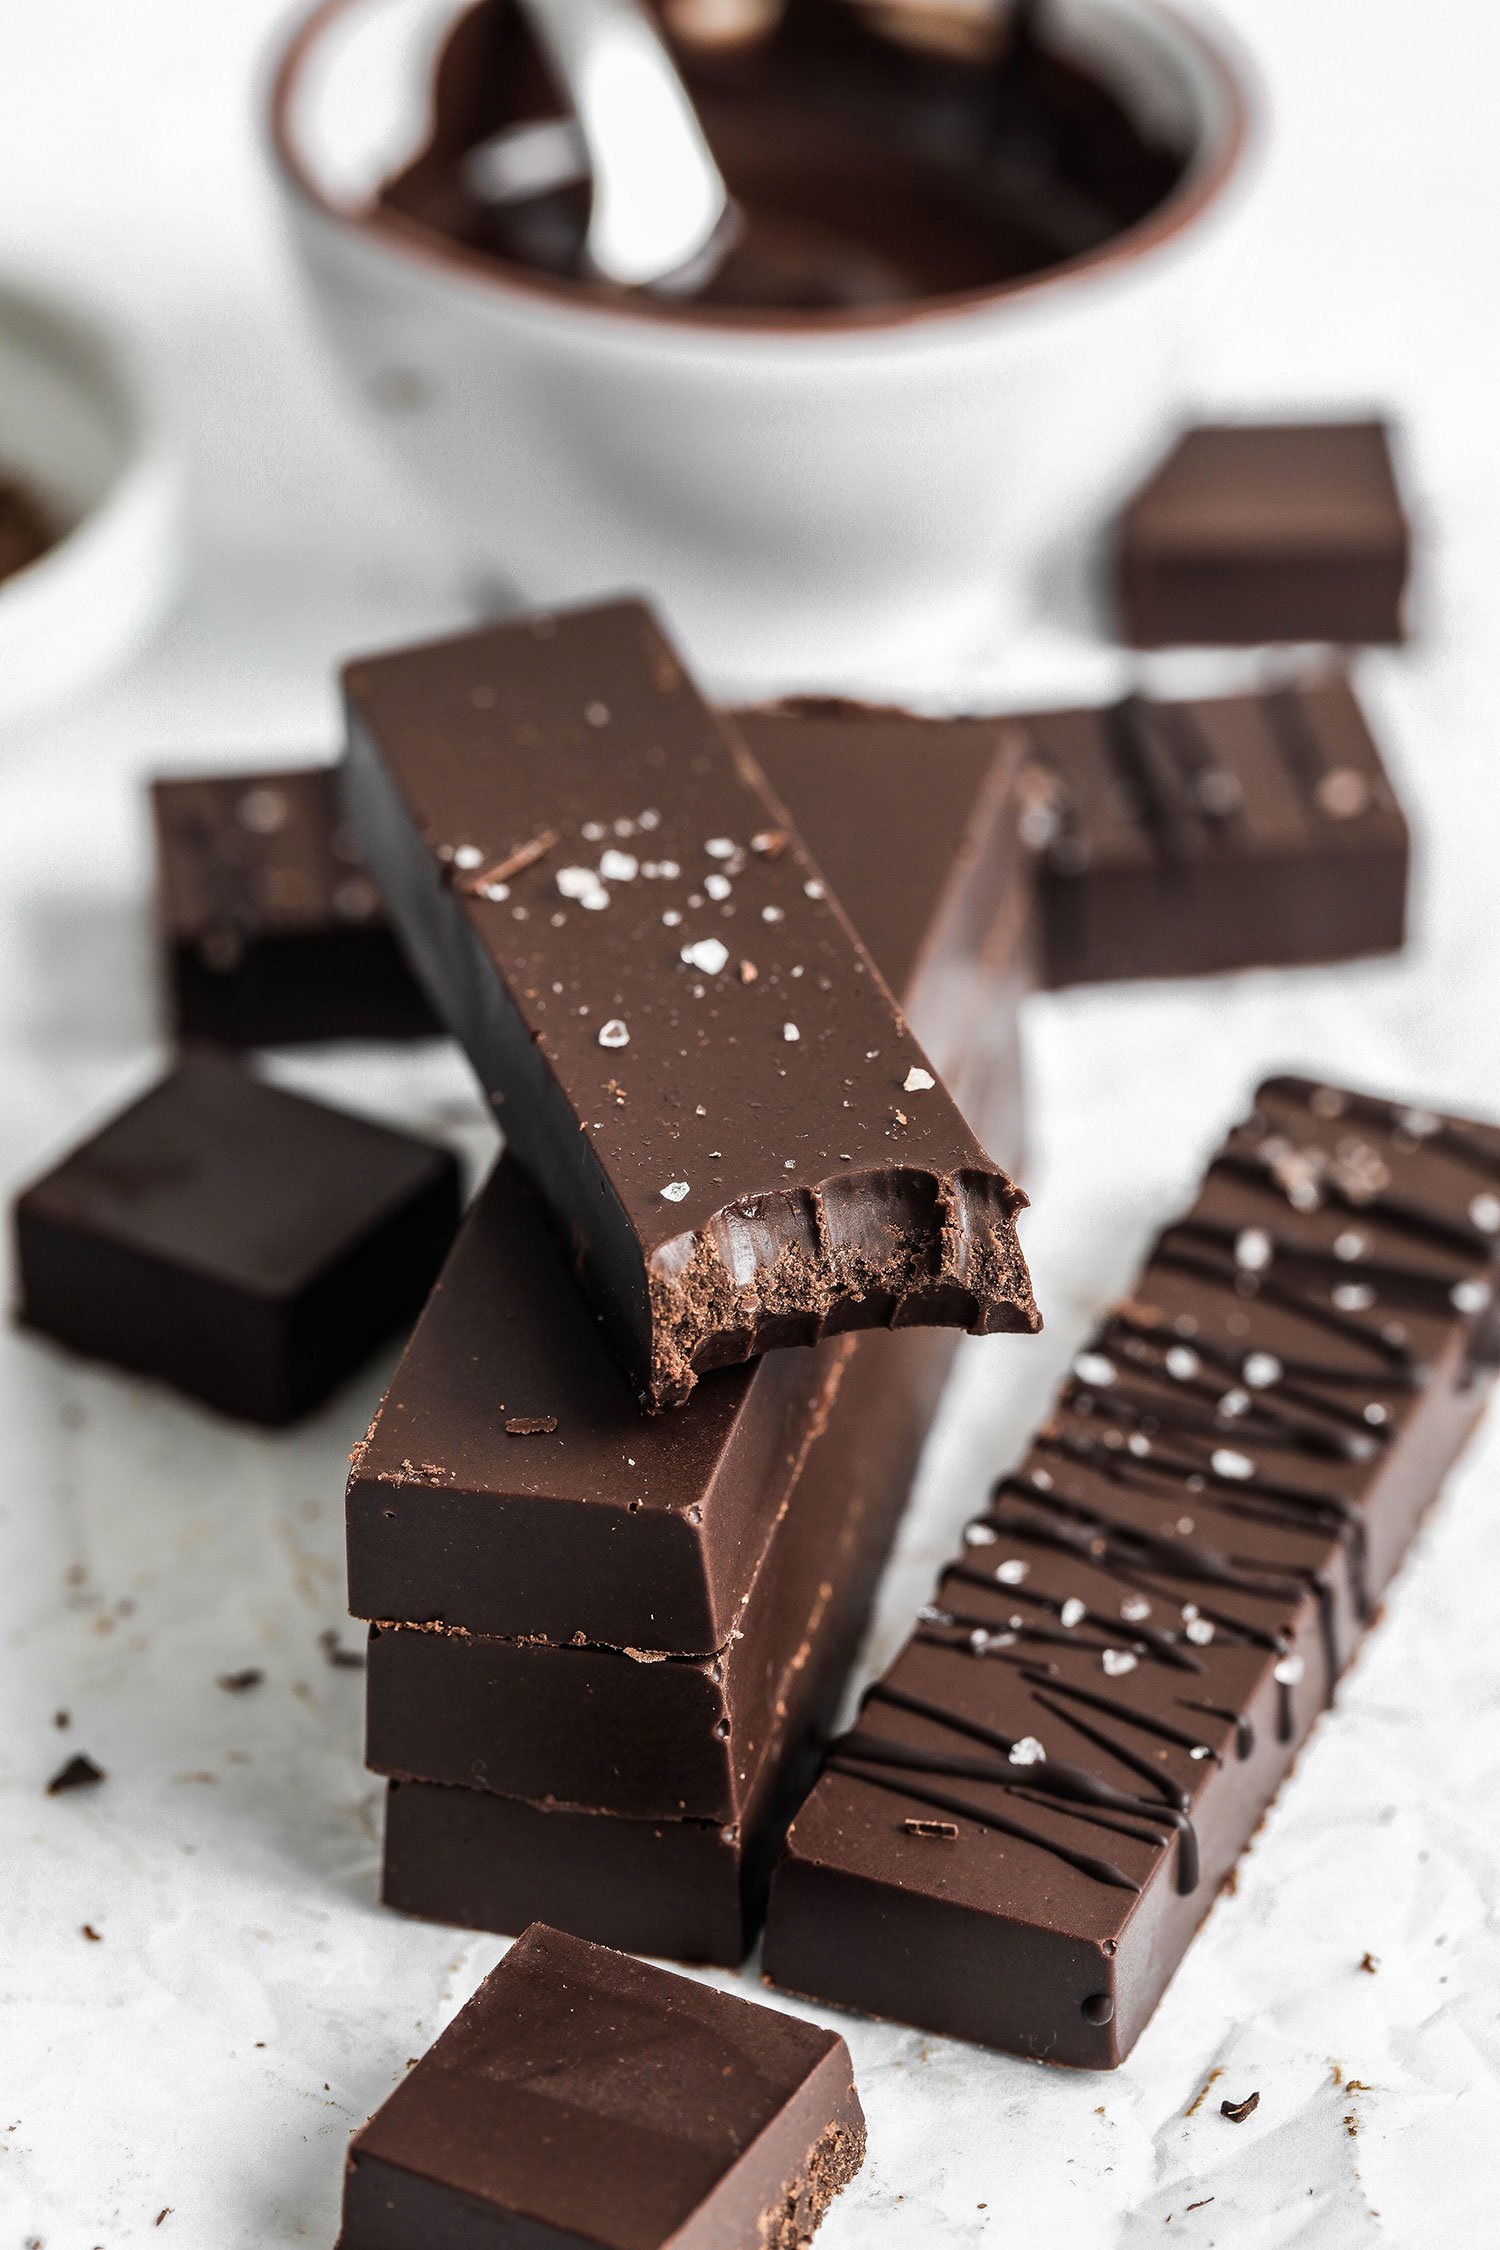 Chocolate can improve brain function